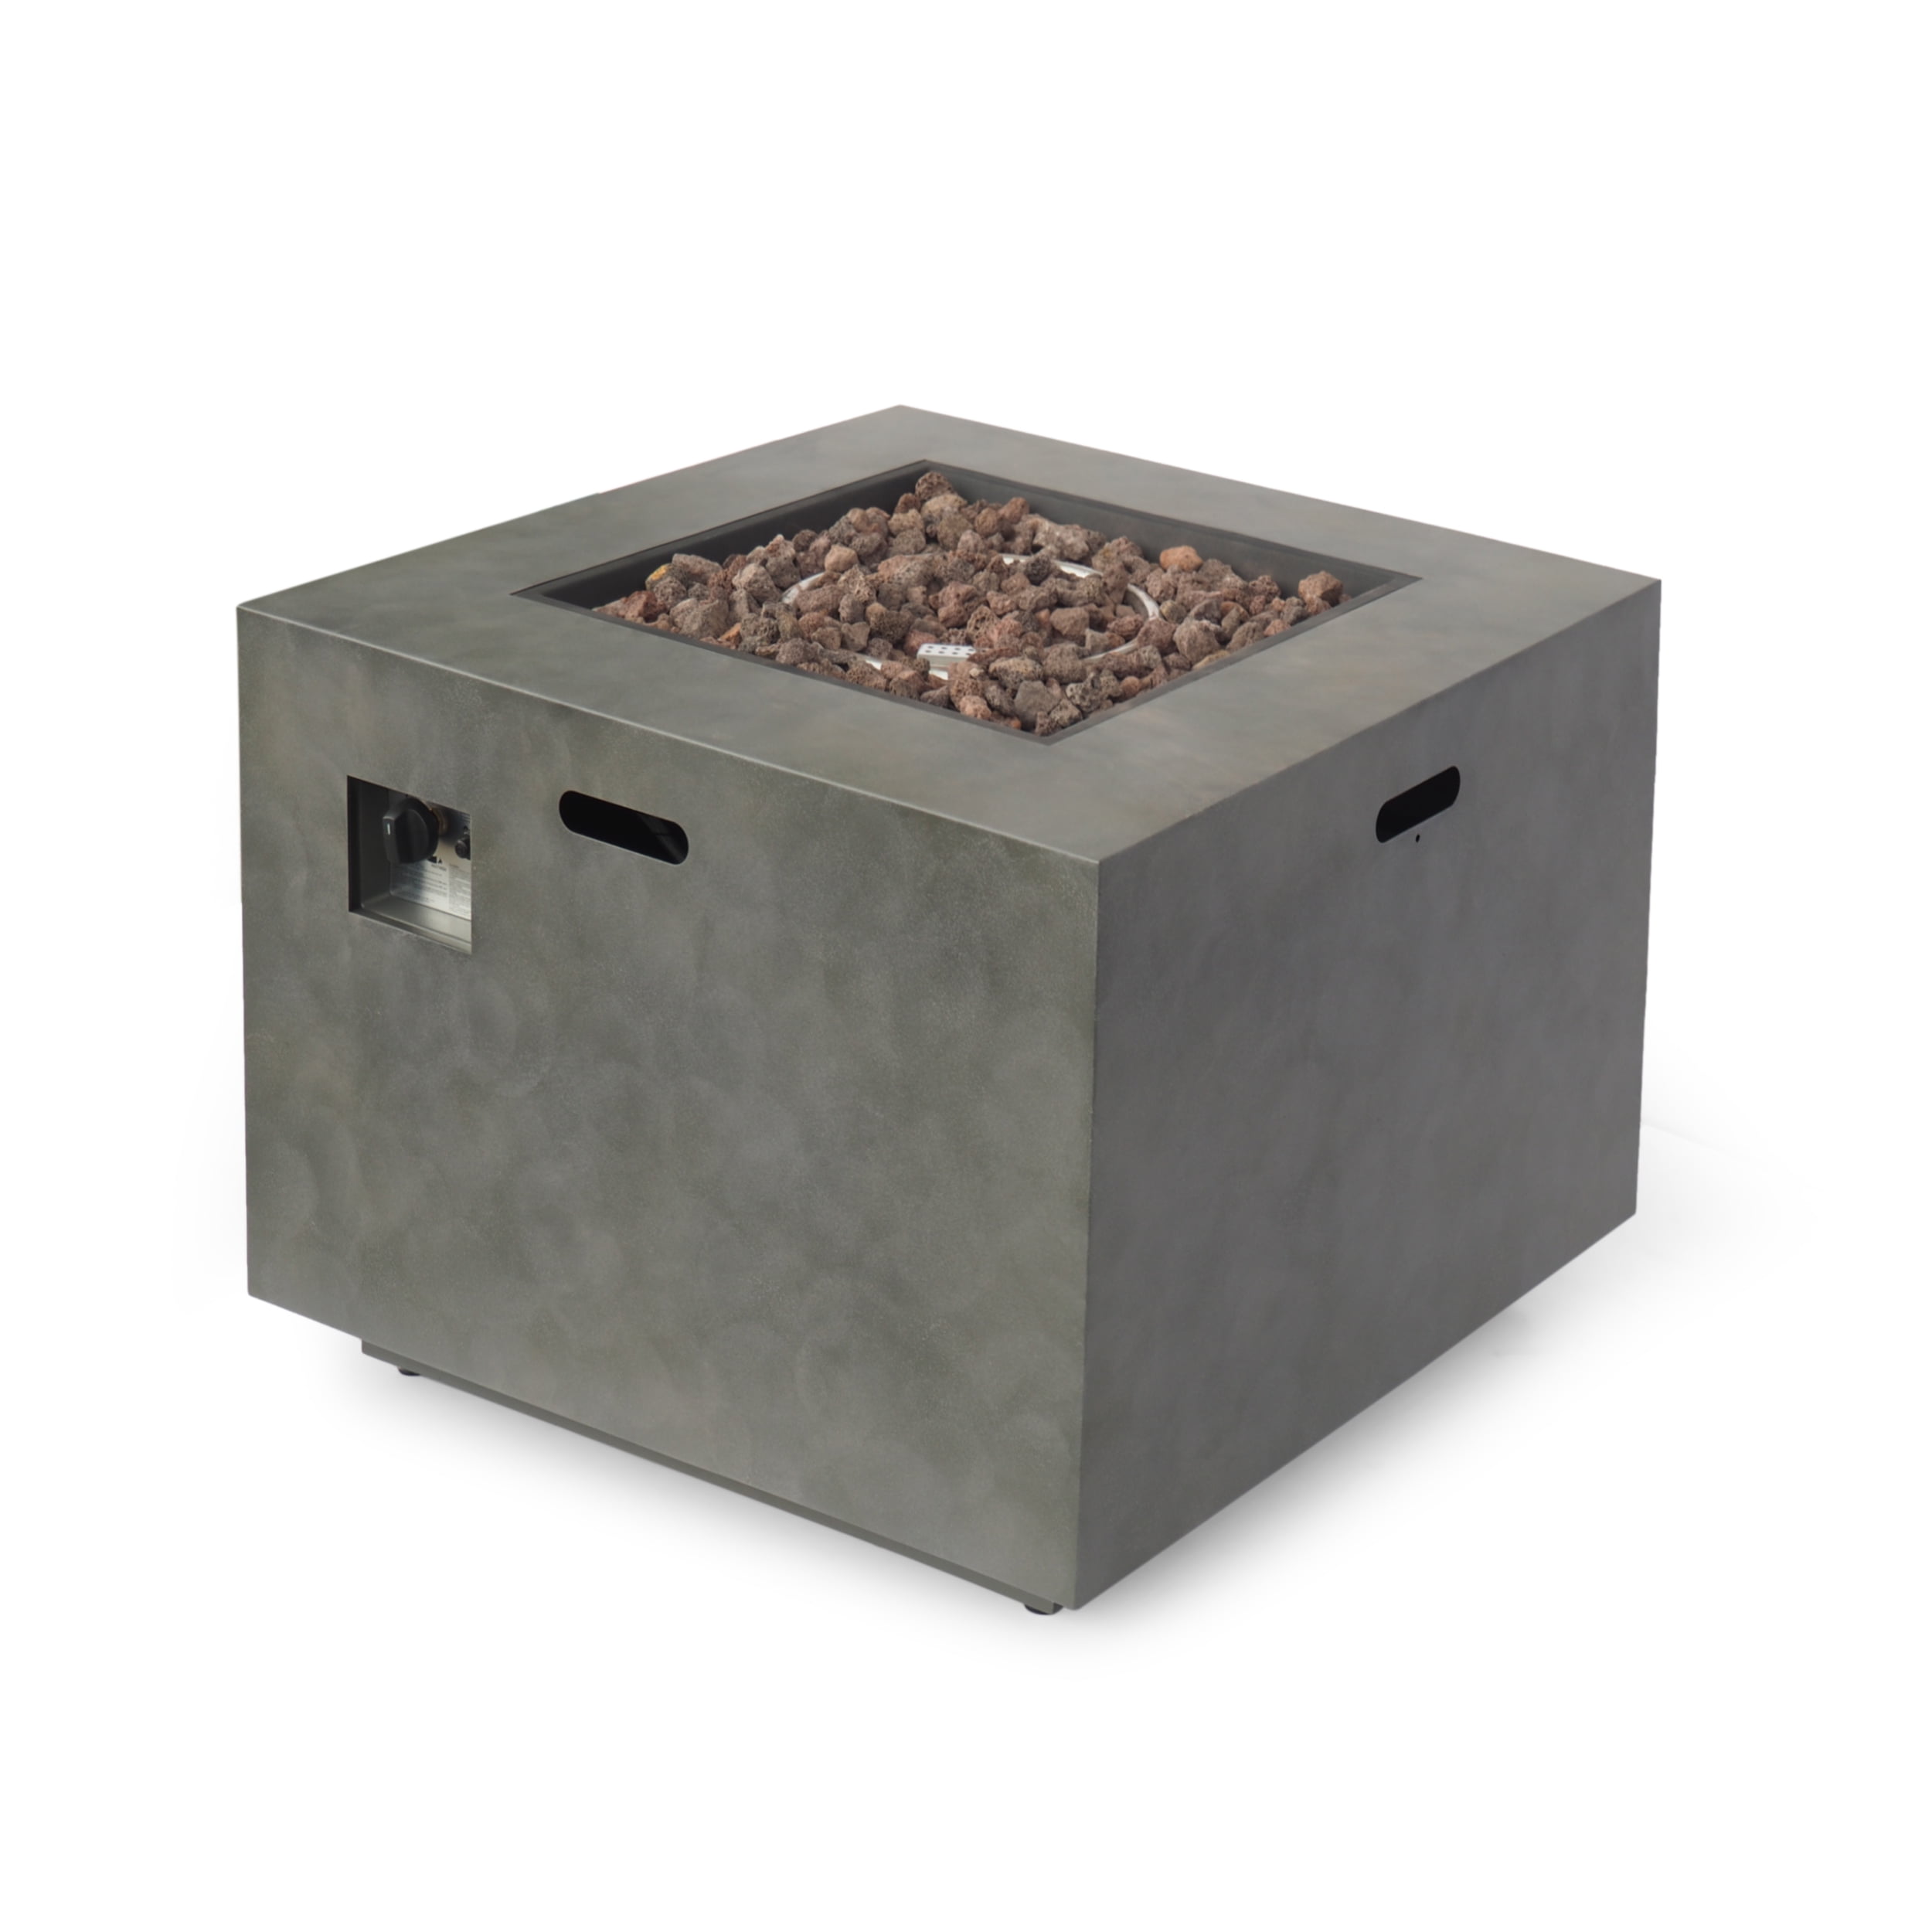 Jasmine Outdoor 33 Inch Square Fire Pit, How To Use Fire Pit Grater